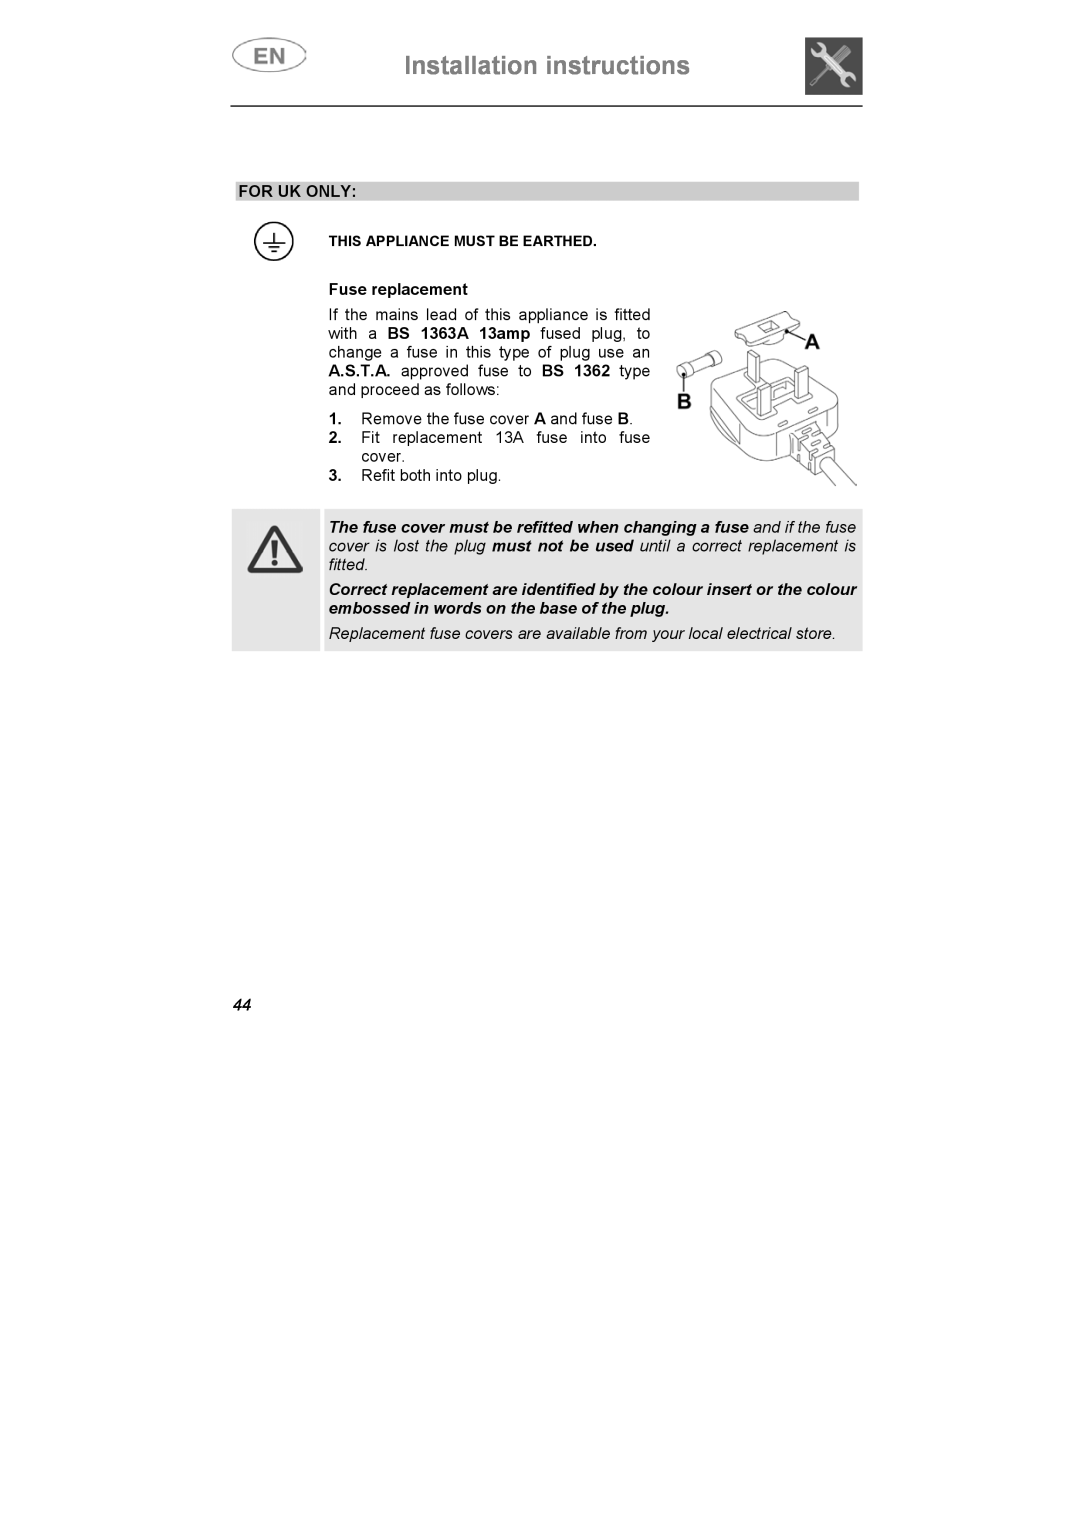 Smeg DI912 instruction manual For Uk Only, Fuse replacement, Installation instructions 